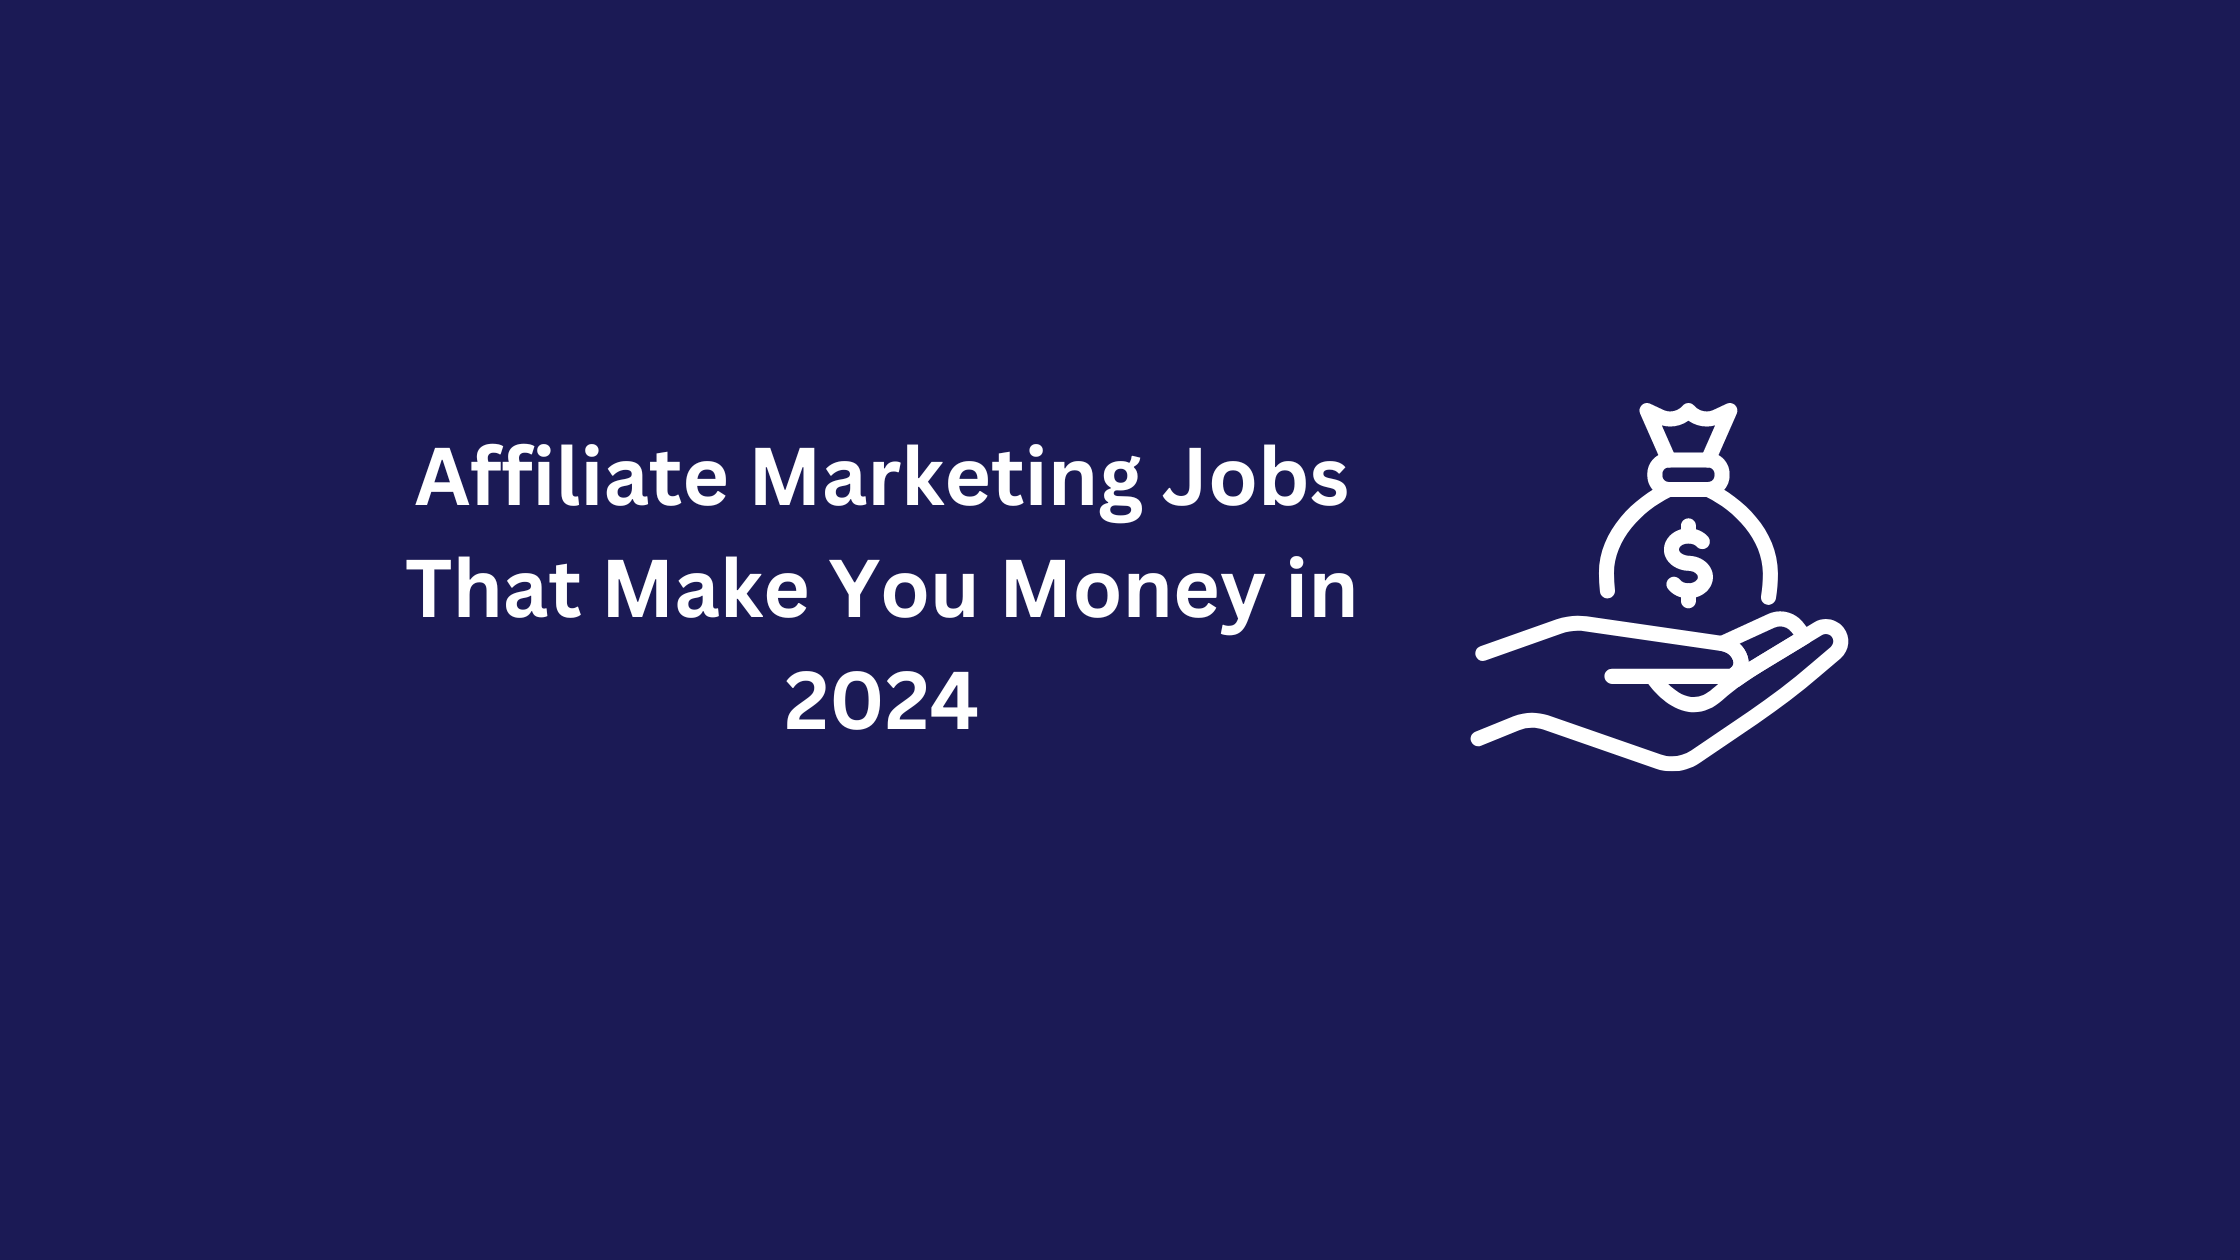 Affiliate Marketing Jobs That Make You Money in 2024